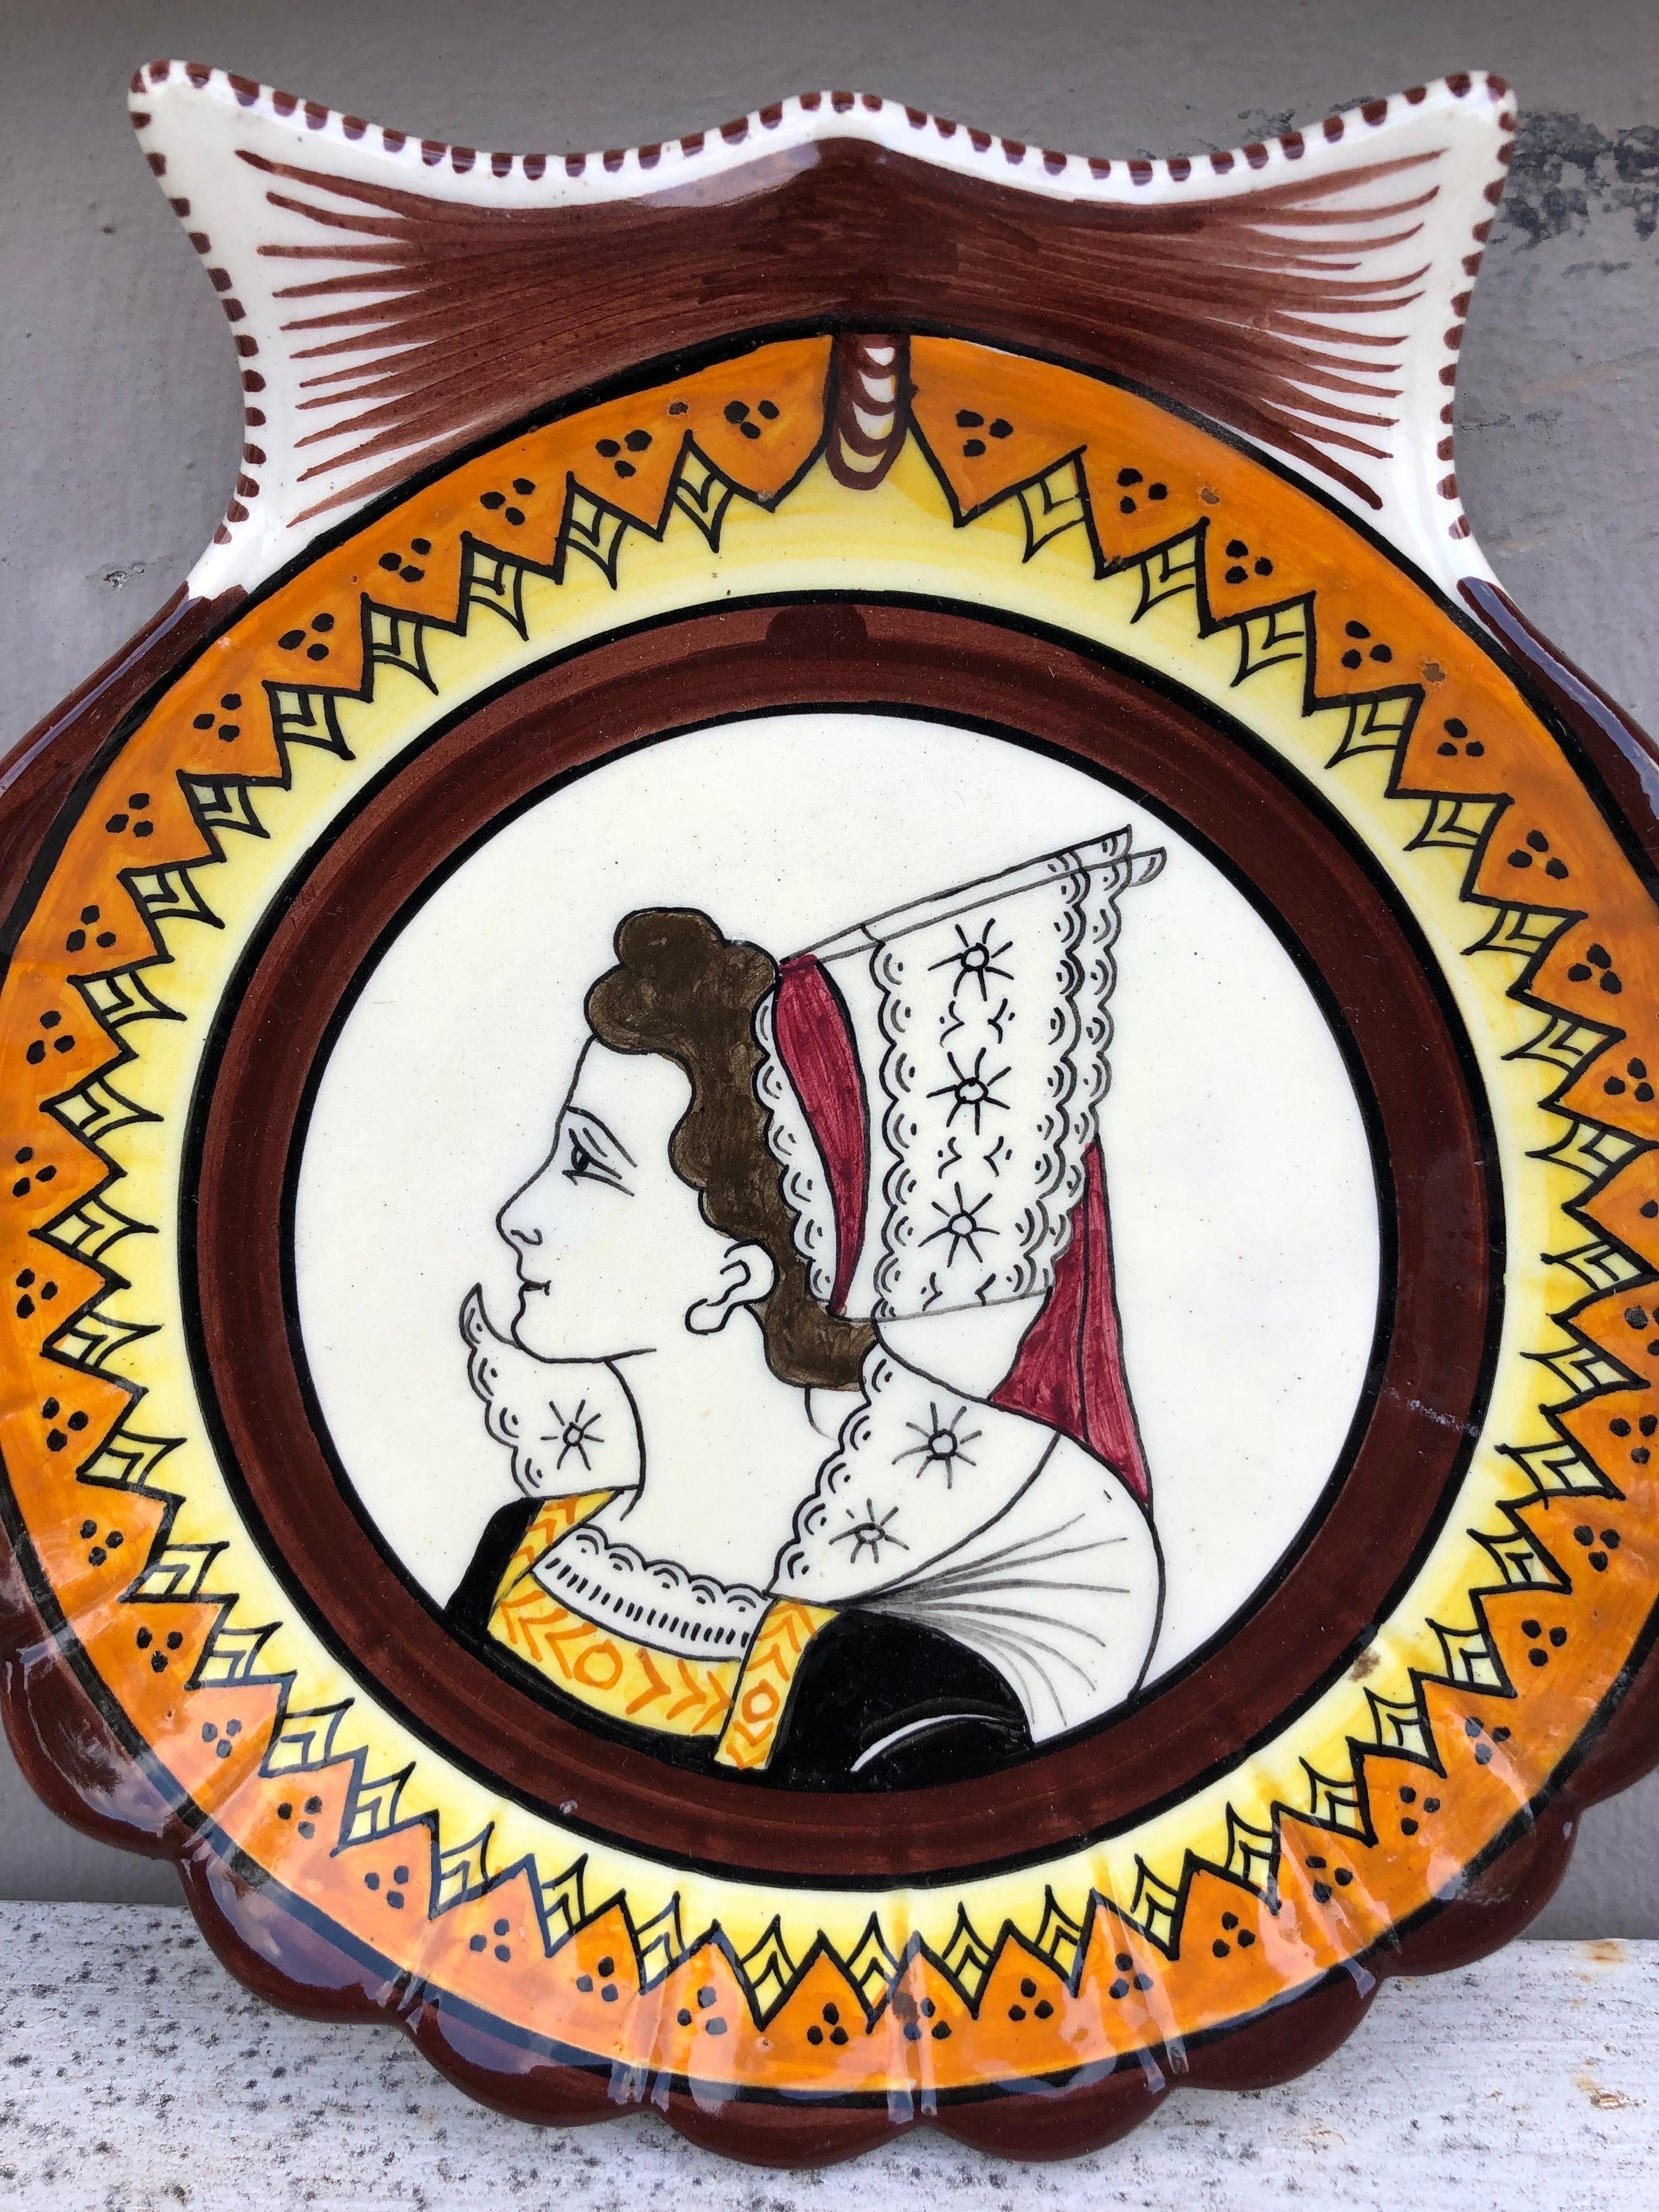 French Faience shell plate Henriot Quimper circa 1930.
Painted with a bretonne with her traditional costume.